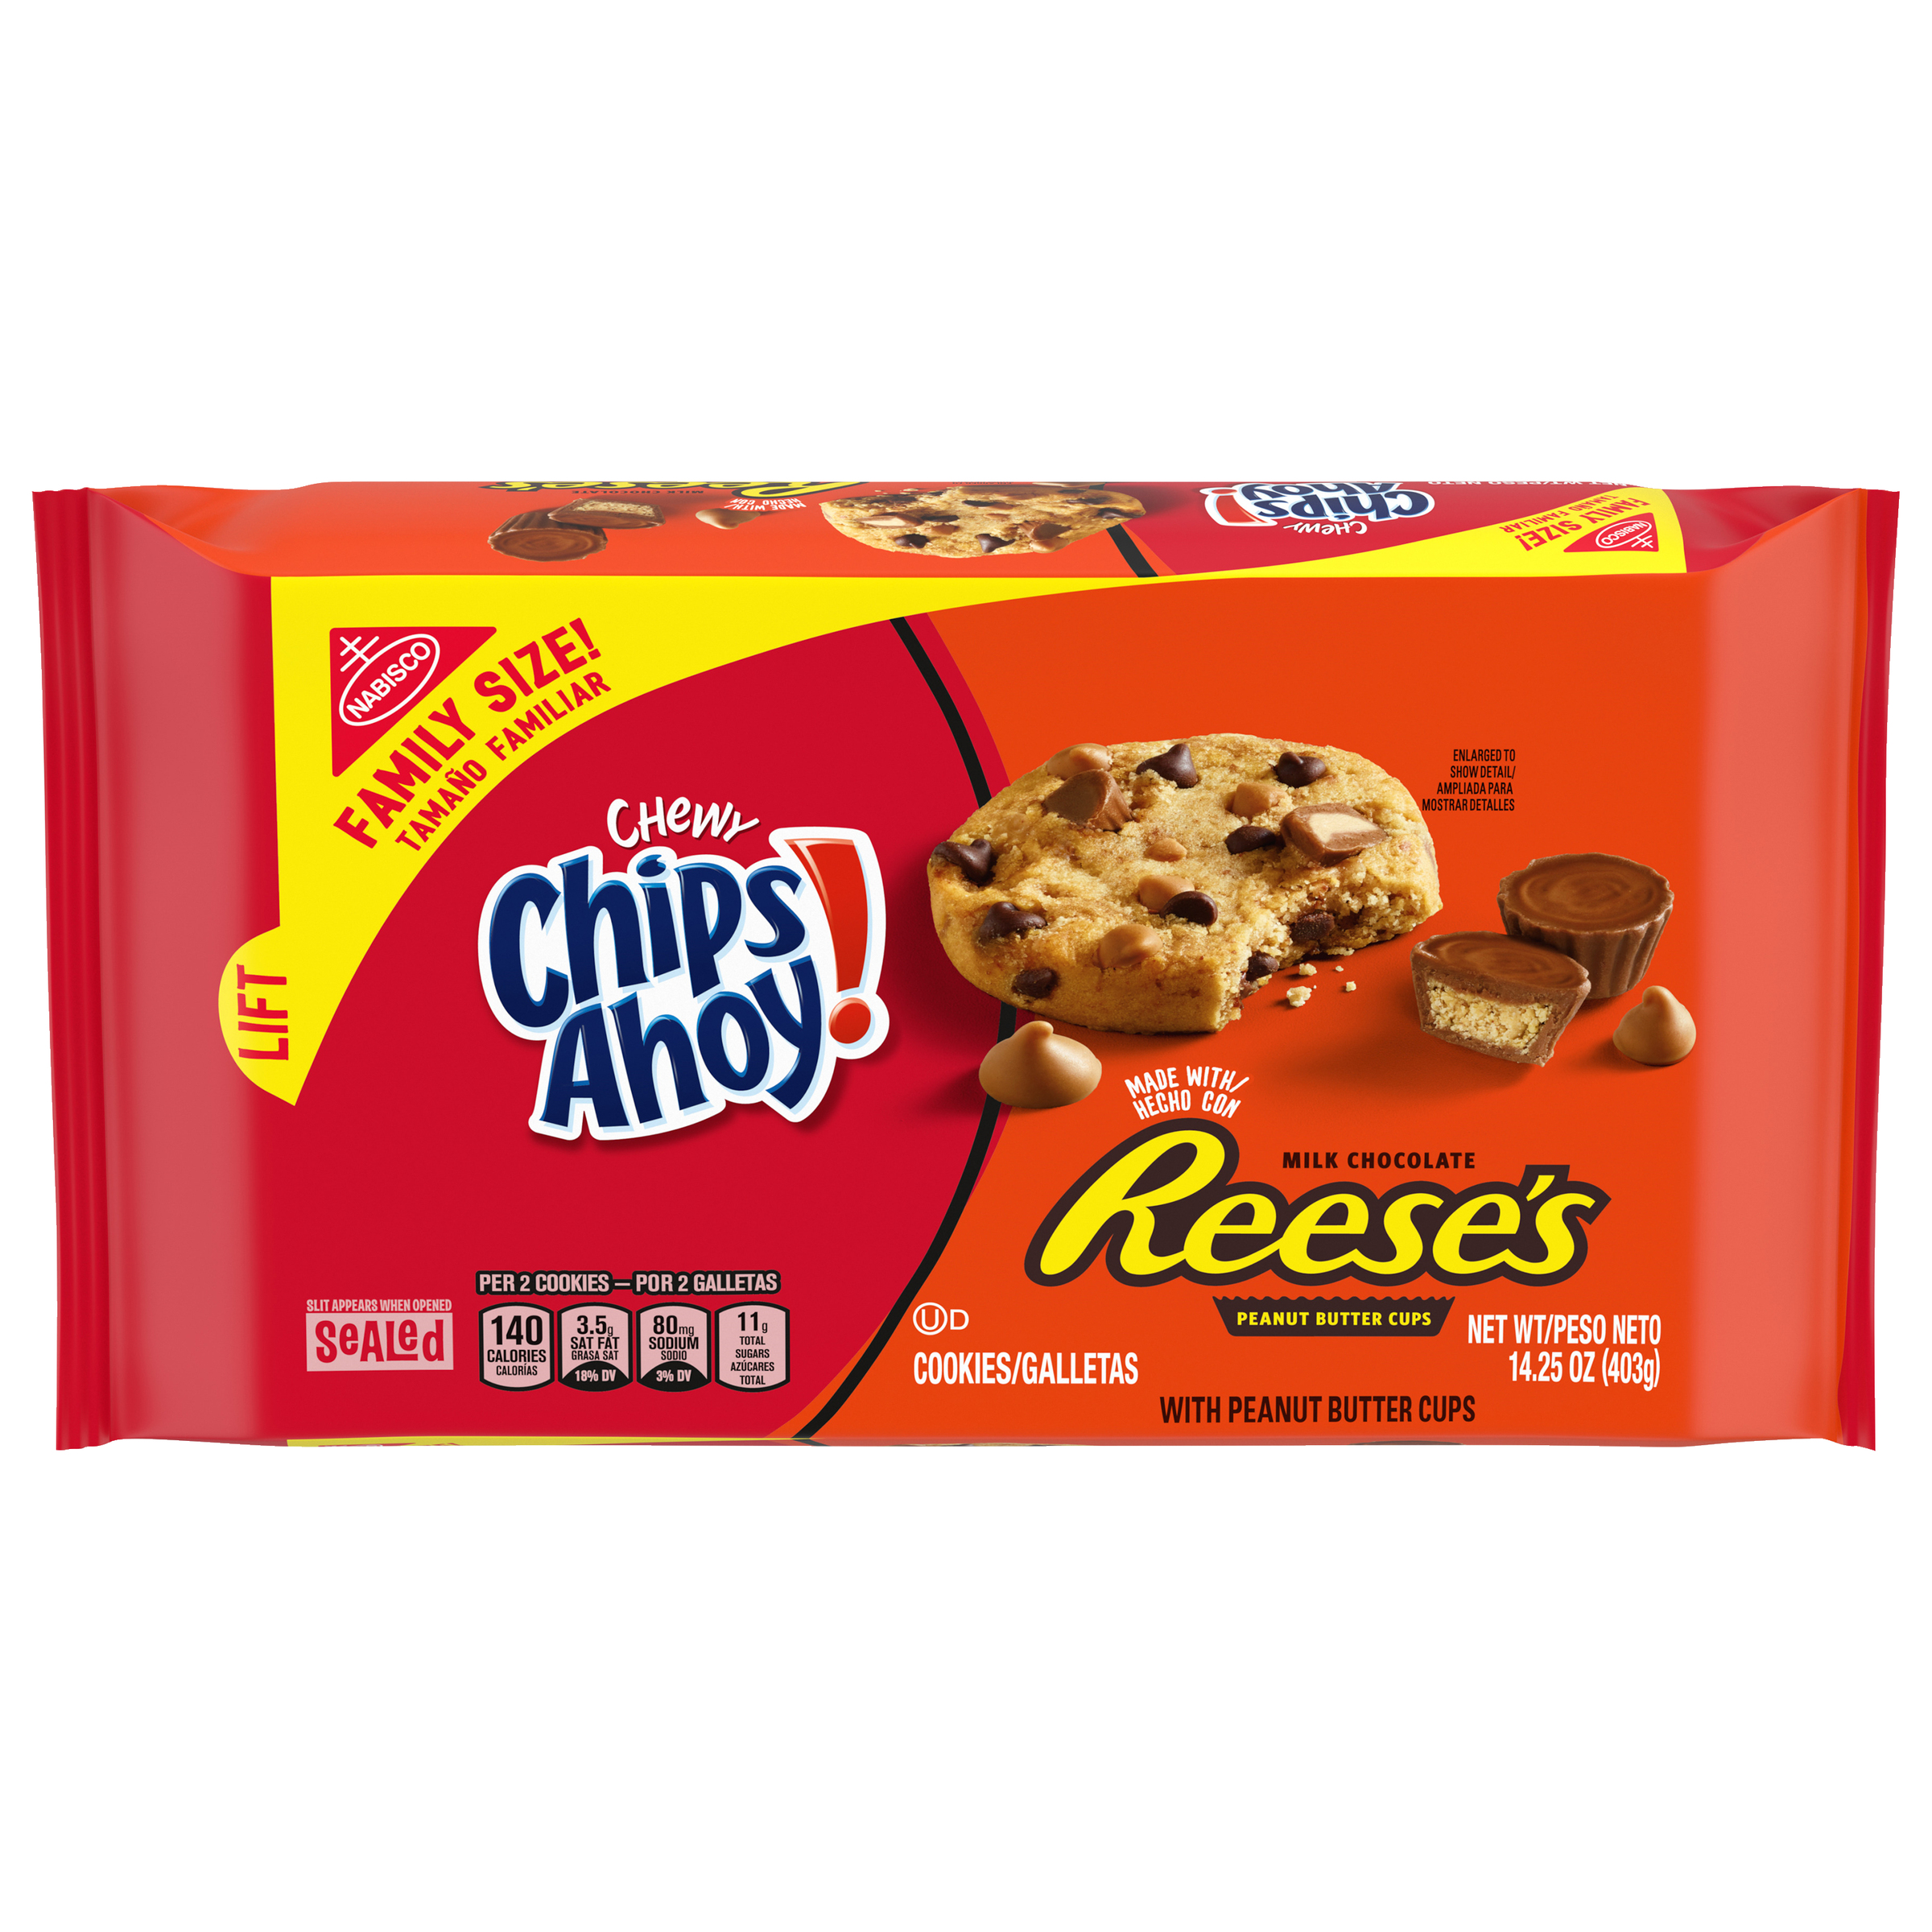 CHIPS AHOY! Chewy Chocolate Chip Cookies with Reese's Peanut Butter Cups, Family Size, 14.25 oz-0